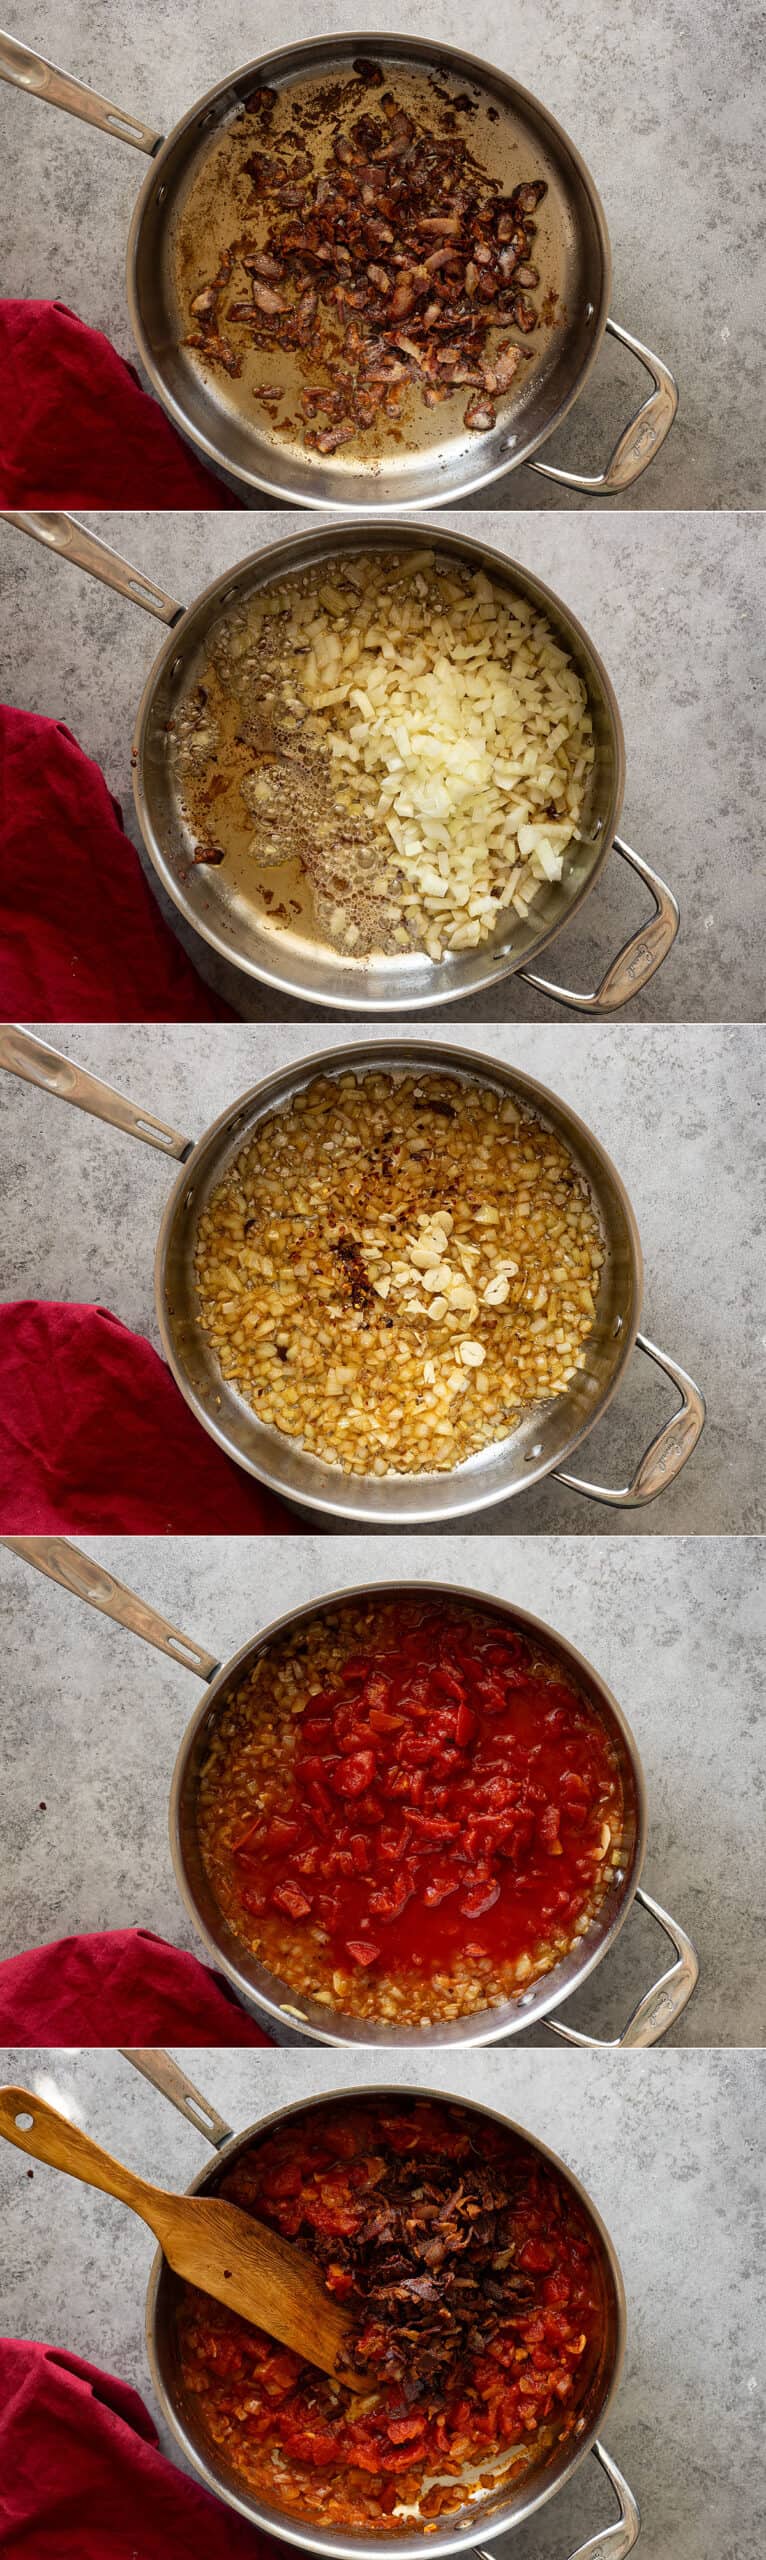 Five pictures showing how to make the sauce.